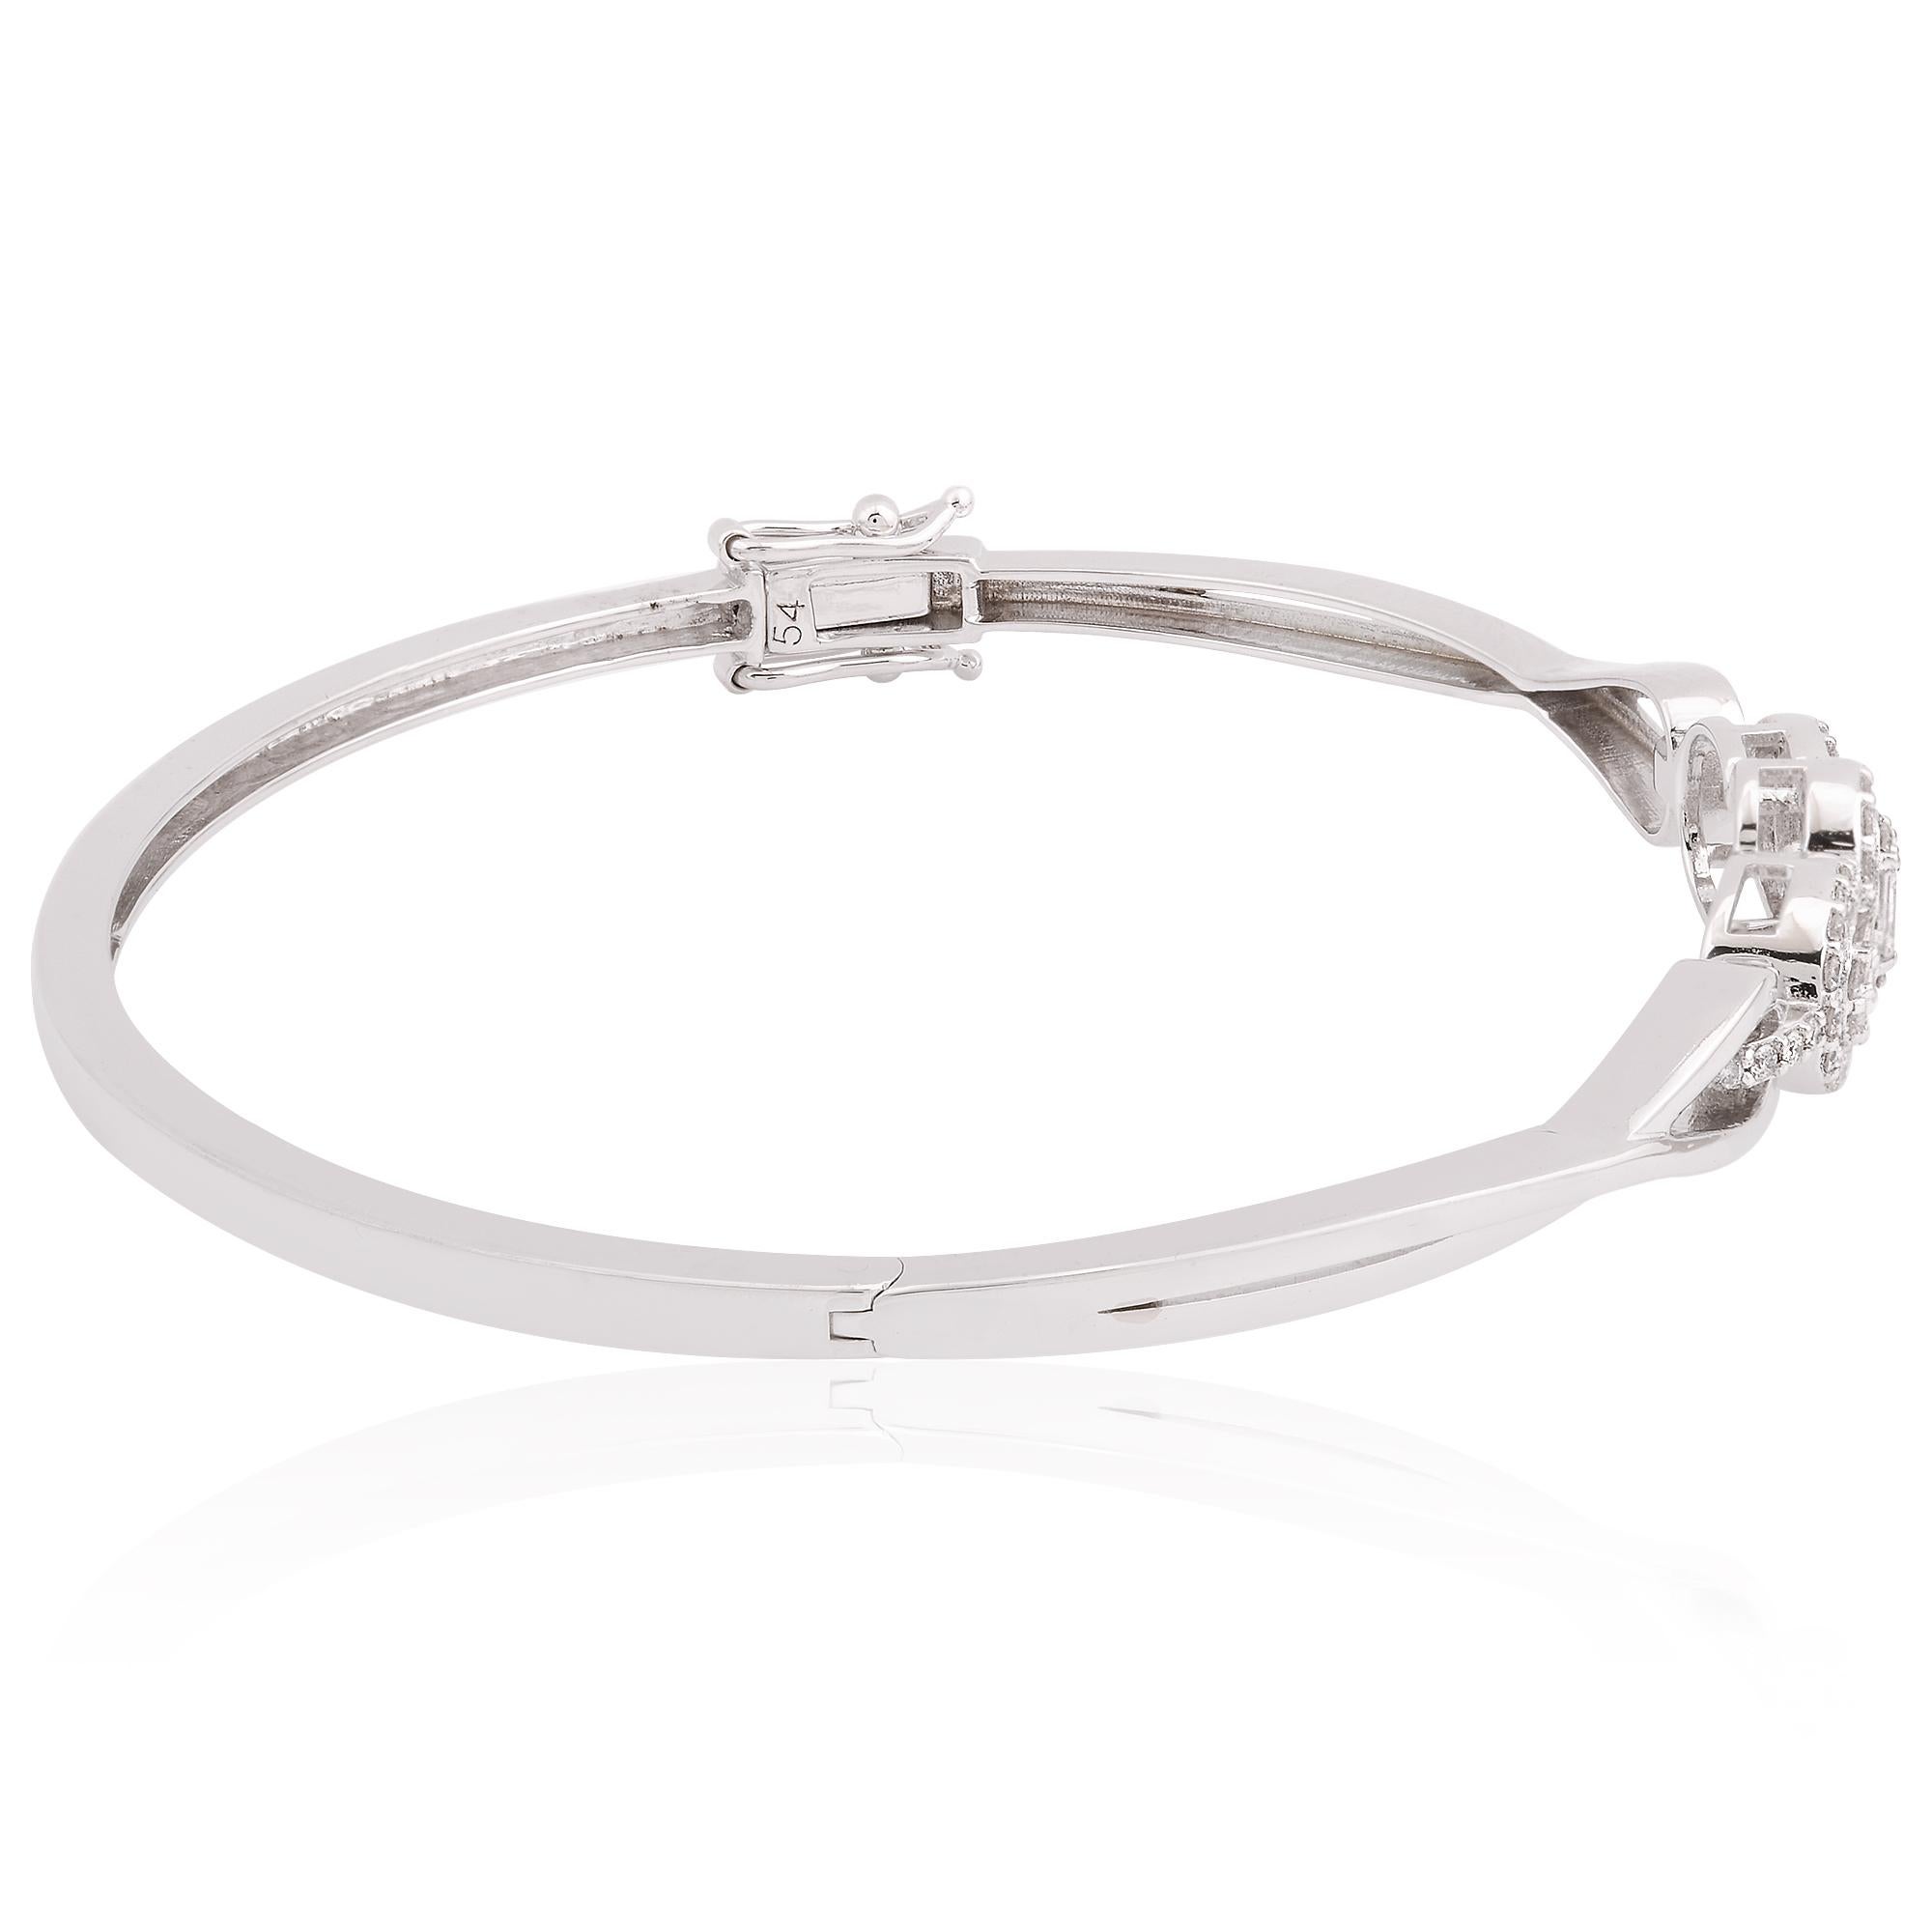 Item Code :- SFB-6024
Gross Weight :- 9.82 gm
14k White Gold Weight :- 9.69 gm
Diamond Weight:- 0.63 ct  ( AVERAGE DIAMOND CLARITY SI1-SI2 & COLOR H-I )
Bangle Size :- 58 x 49 - 18 cm

✦ Sizing
.....................
We can adjust most items to fit